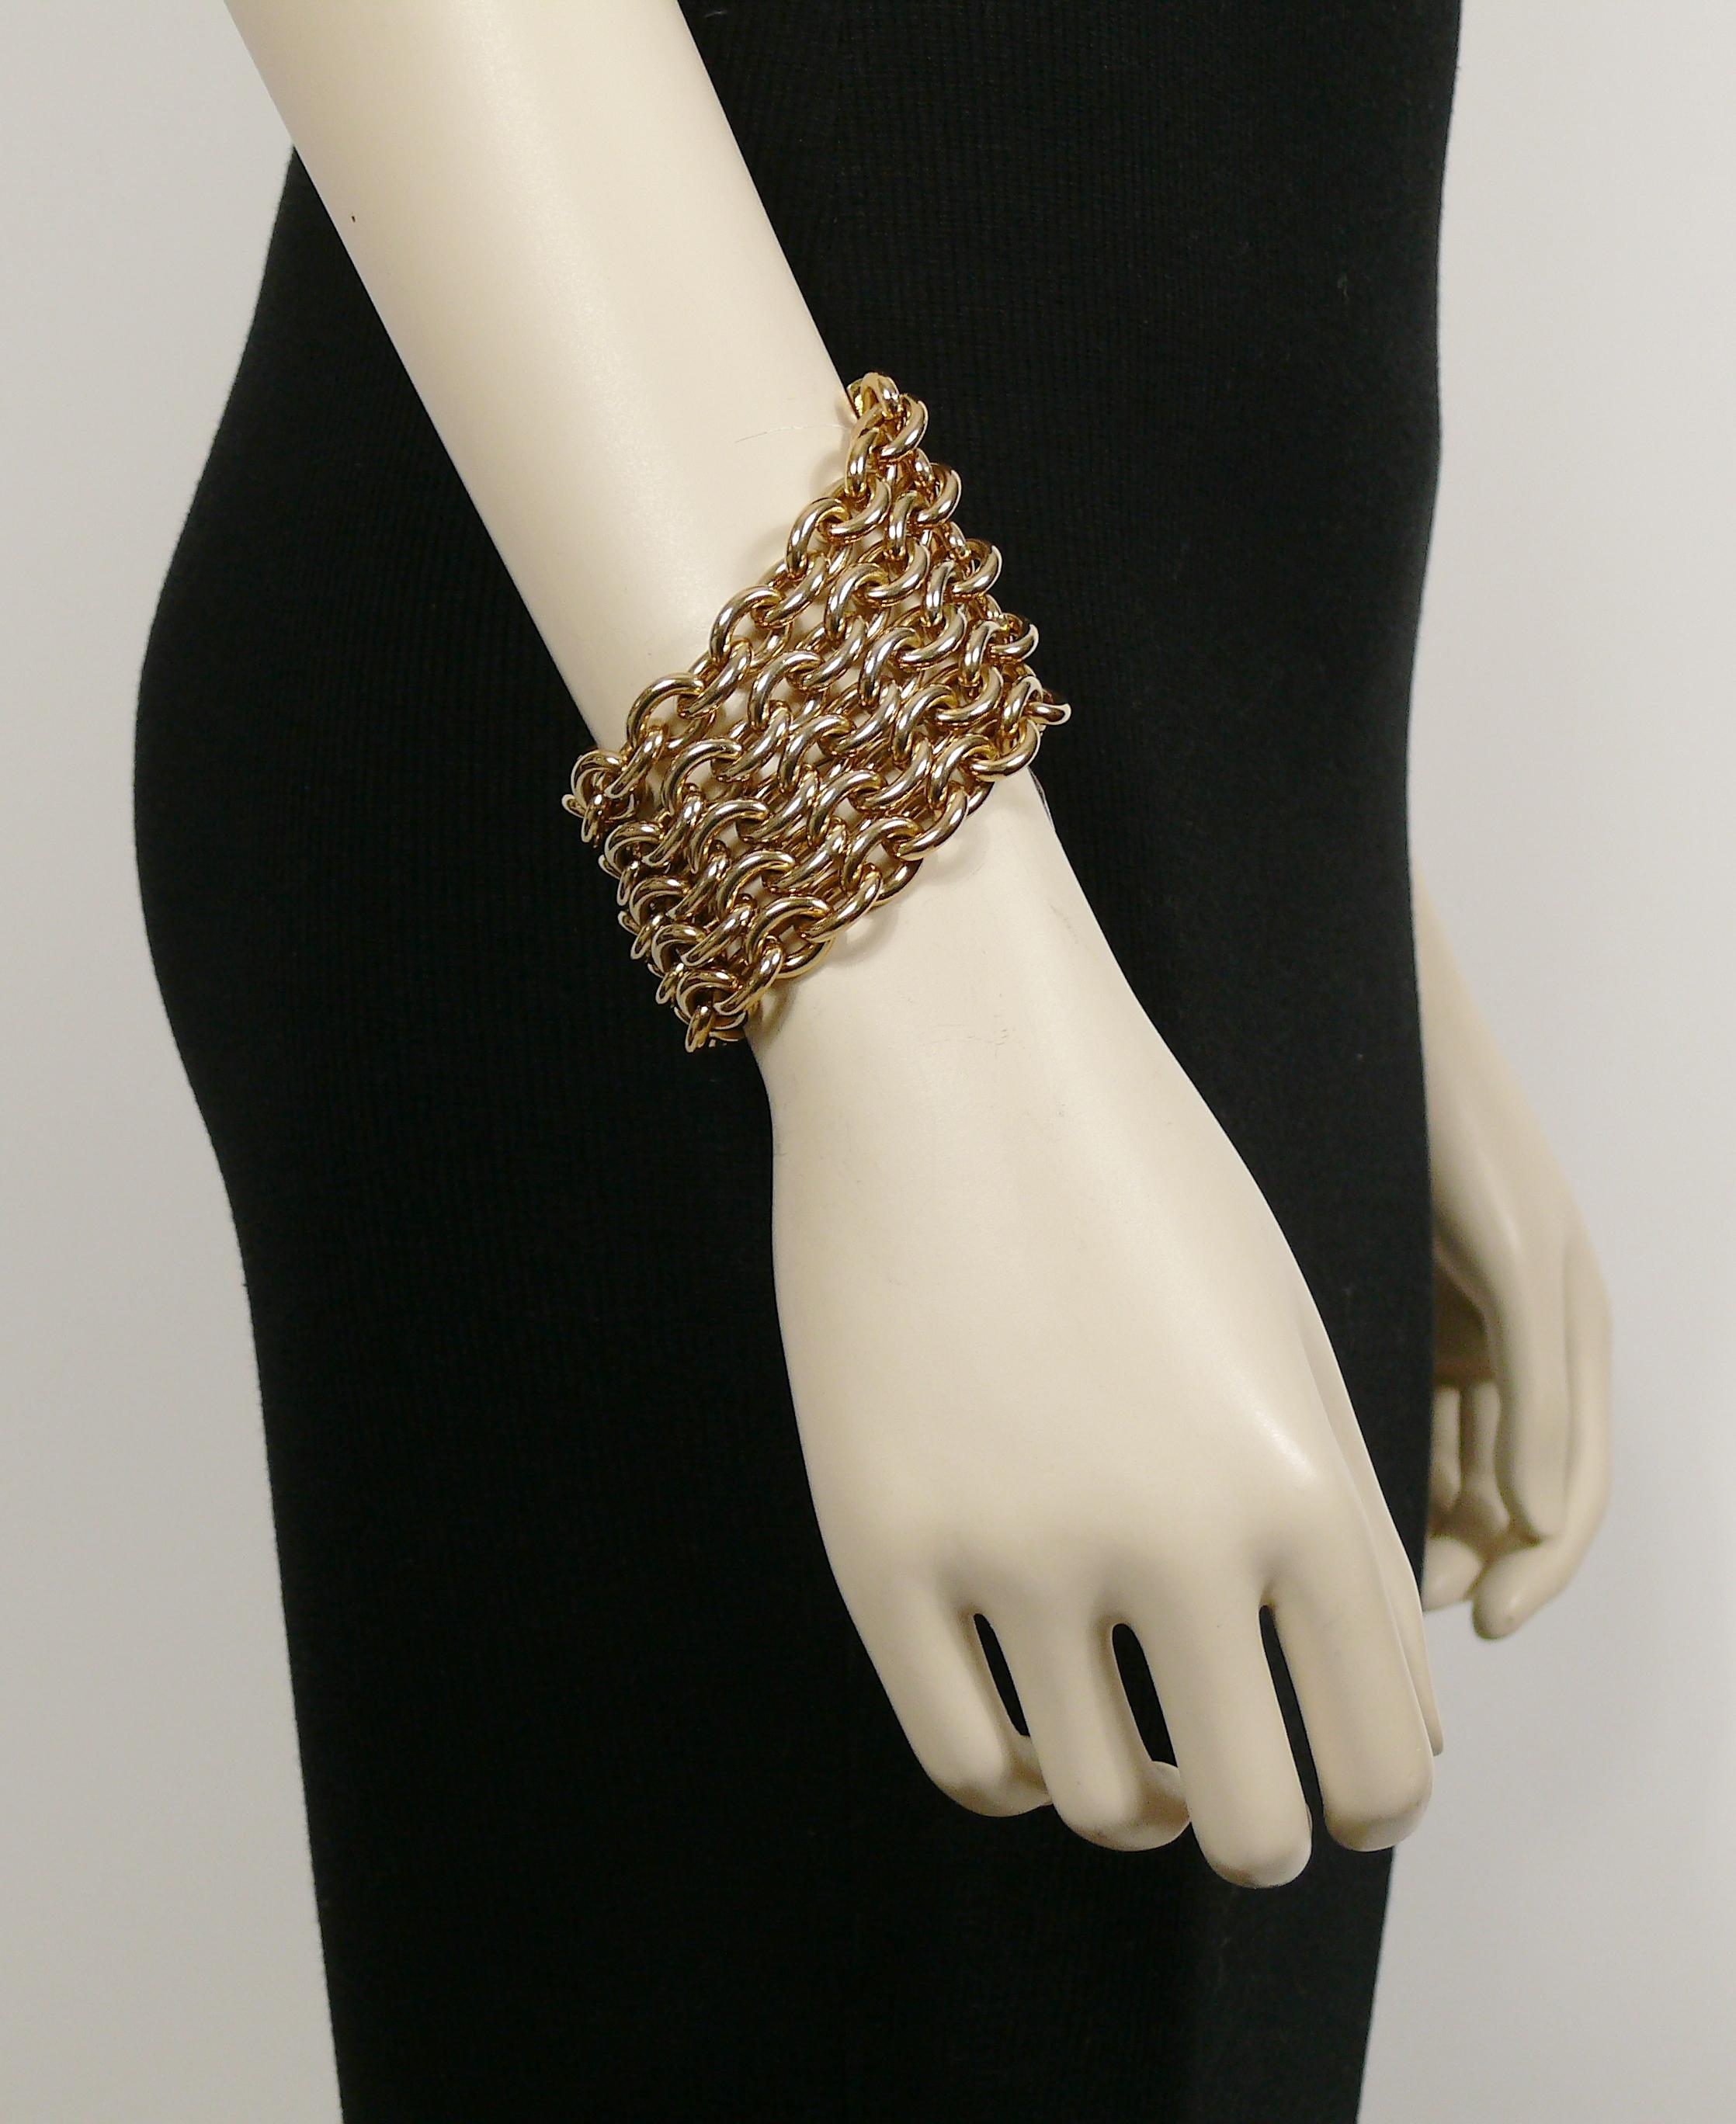 CHANEL vintage gold toned cuff bracelet featuring 5 strands of chunky chain links.

T bar and toggle closure.

Collection n°28 (year : 1993).

Embossed CHANEL 2 8 Made in France.

Indicative measurements : length approx. 20 cm (7.87 inches) / width